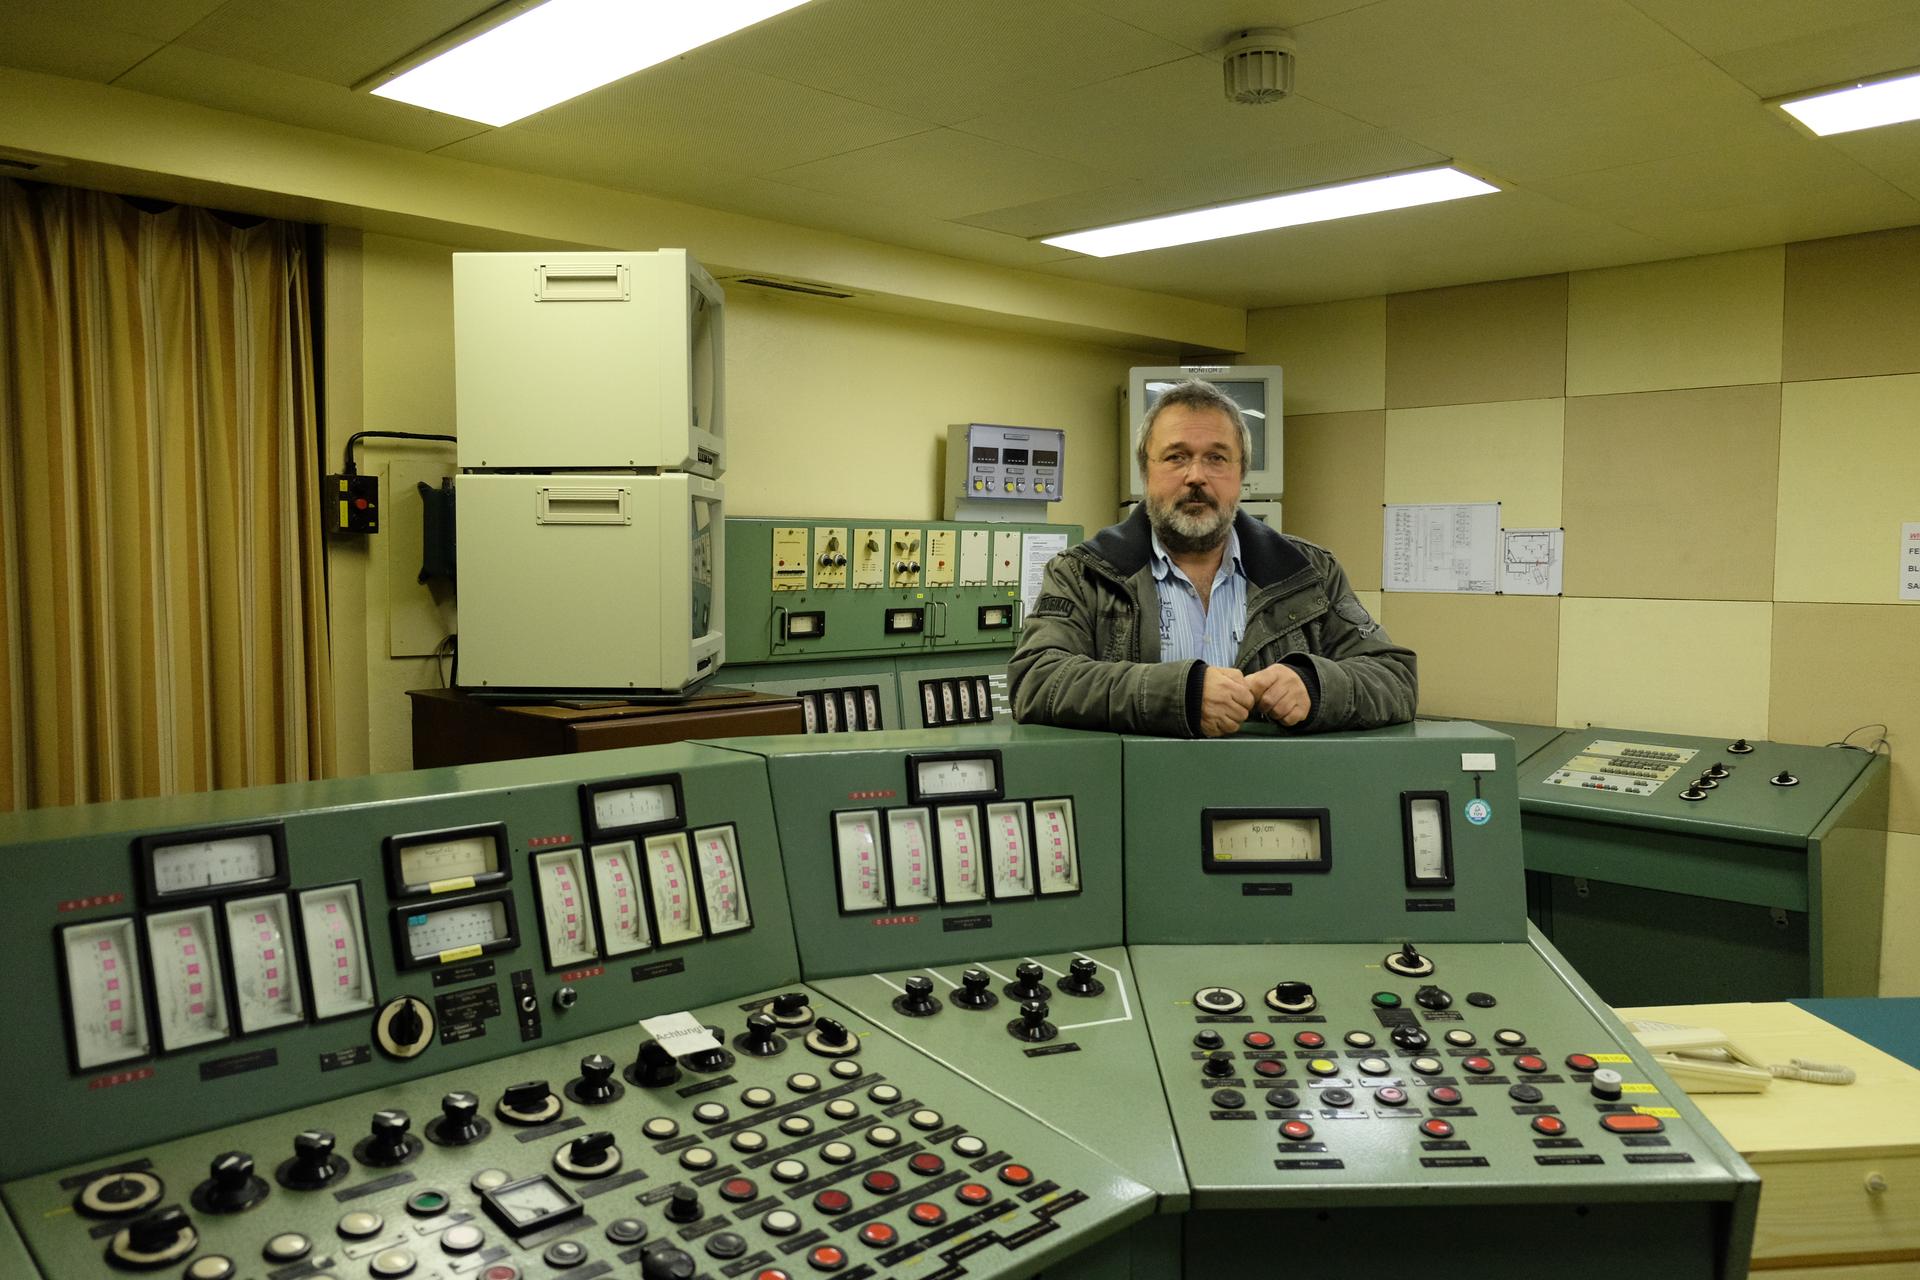 Jörg Möller, an engineer at a defunct nuclear power plant in Germany